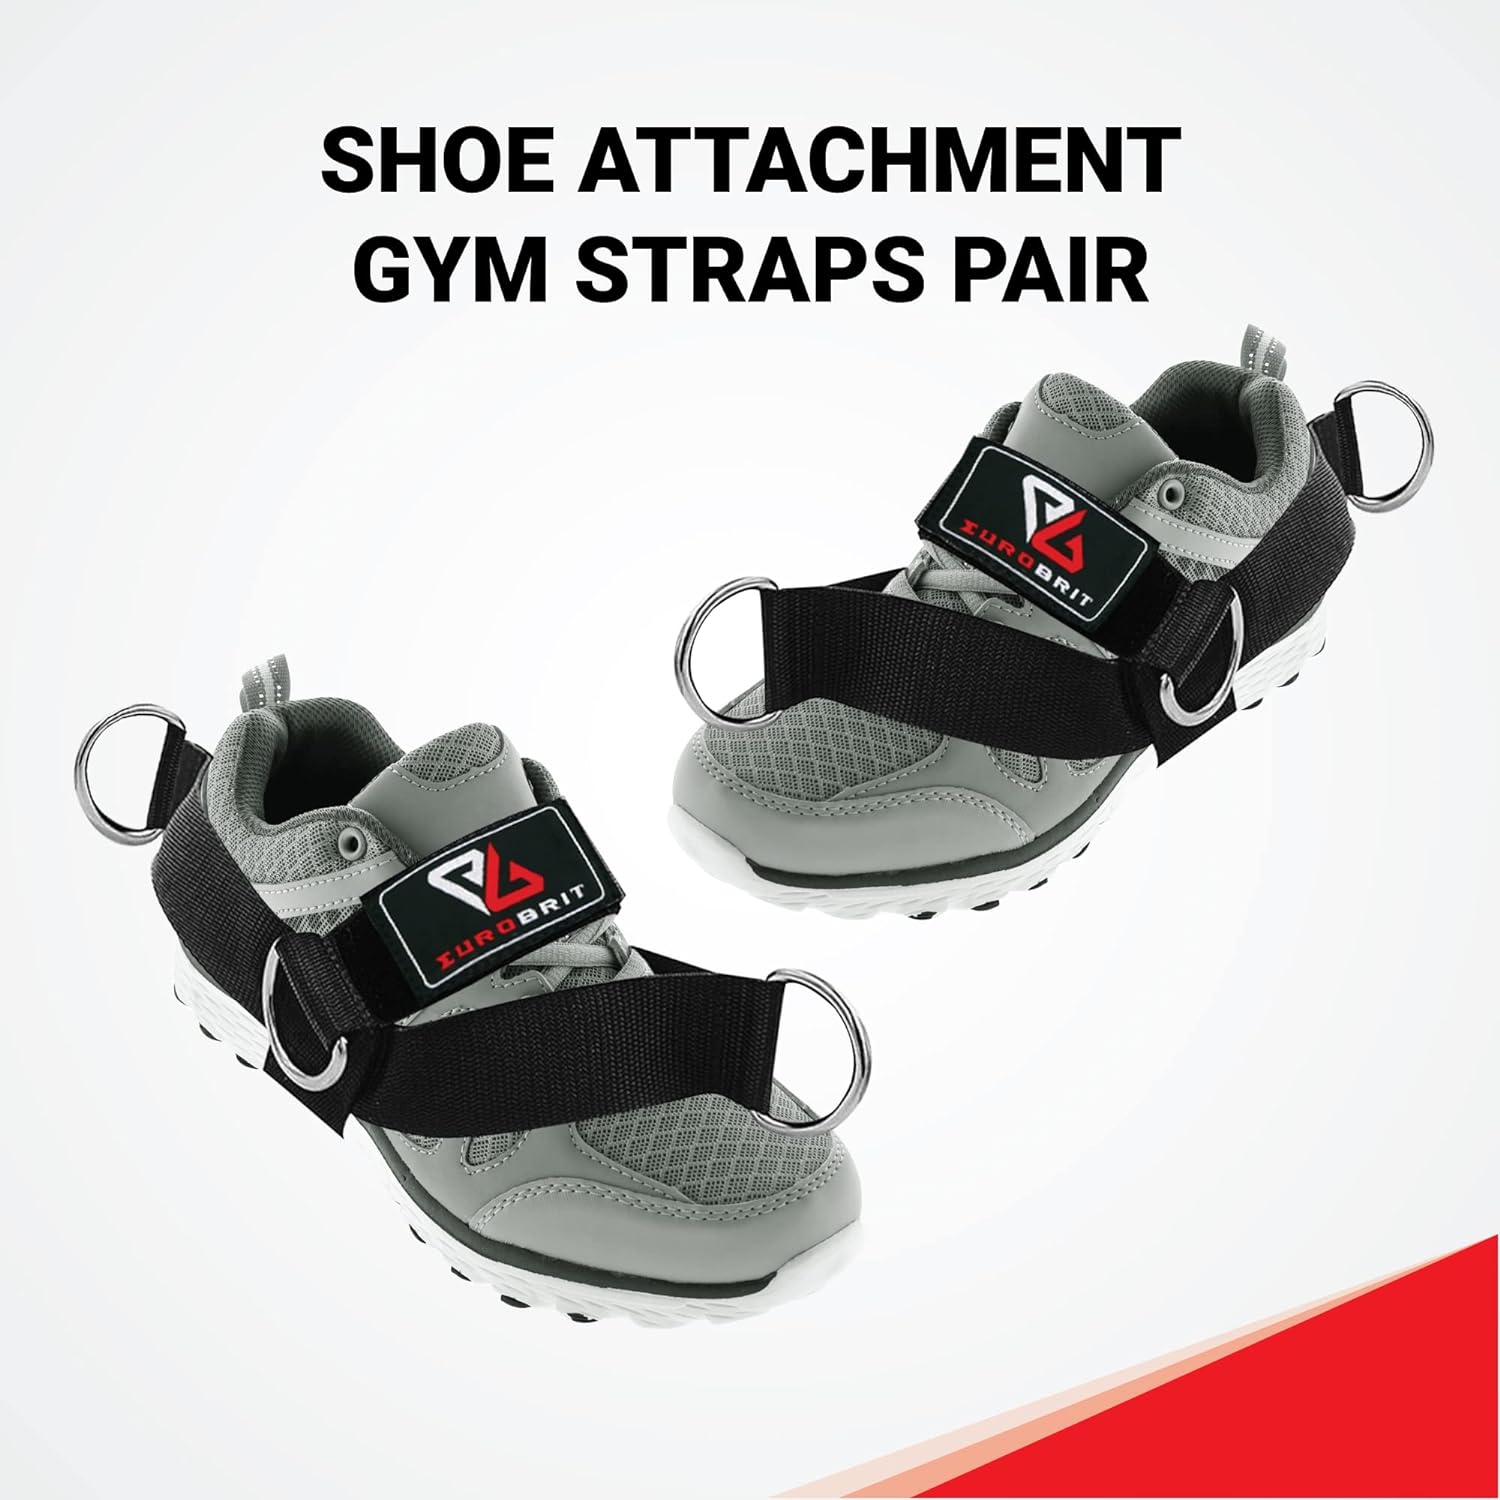 Euro Brit Ankle Strap for Cable Machine